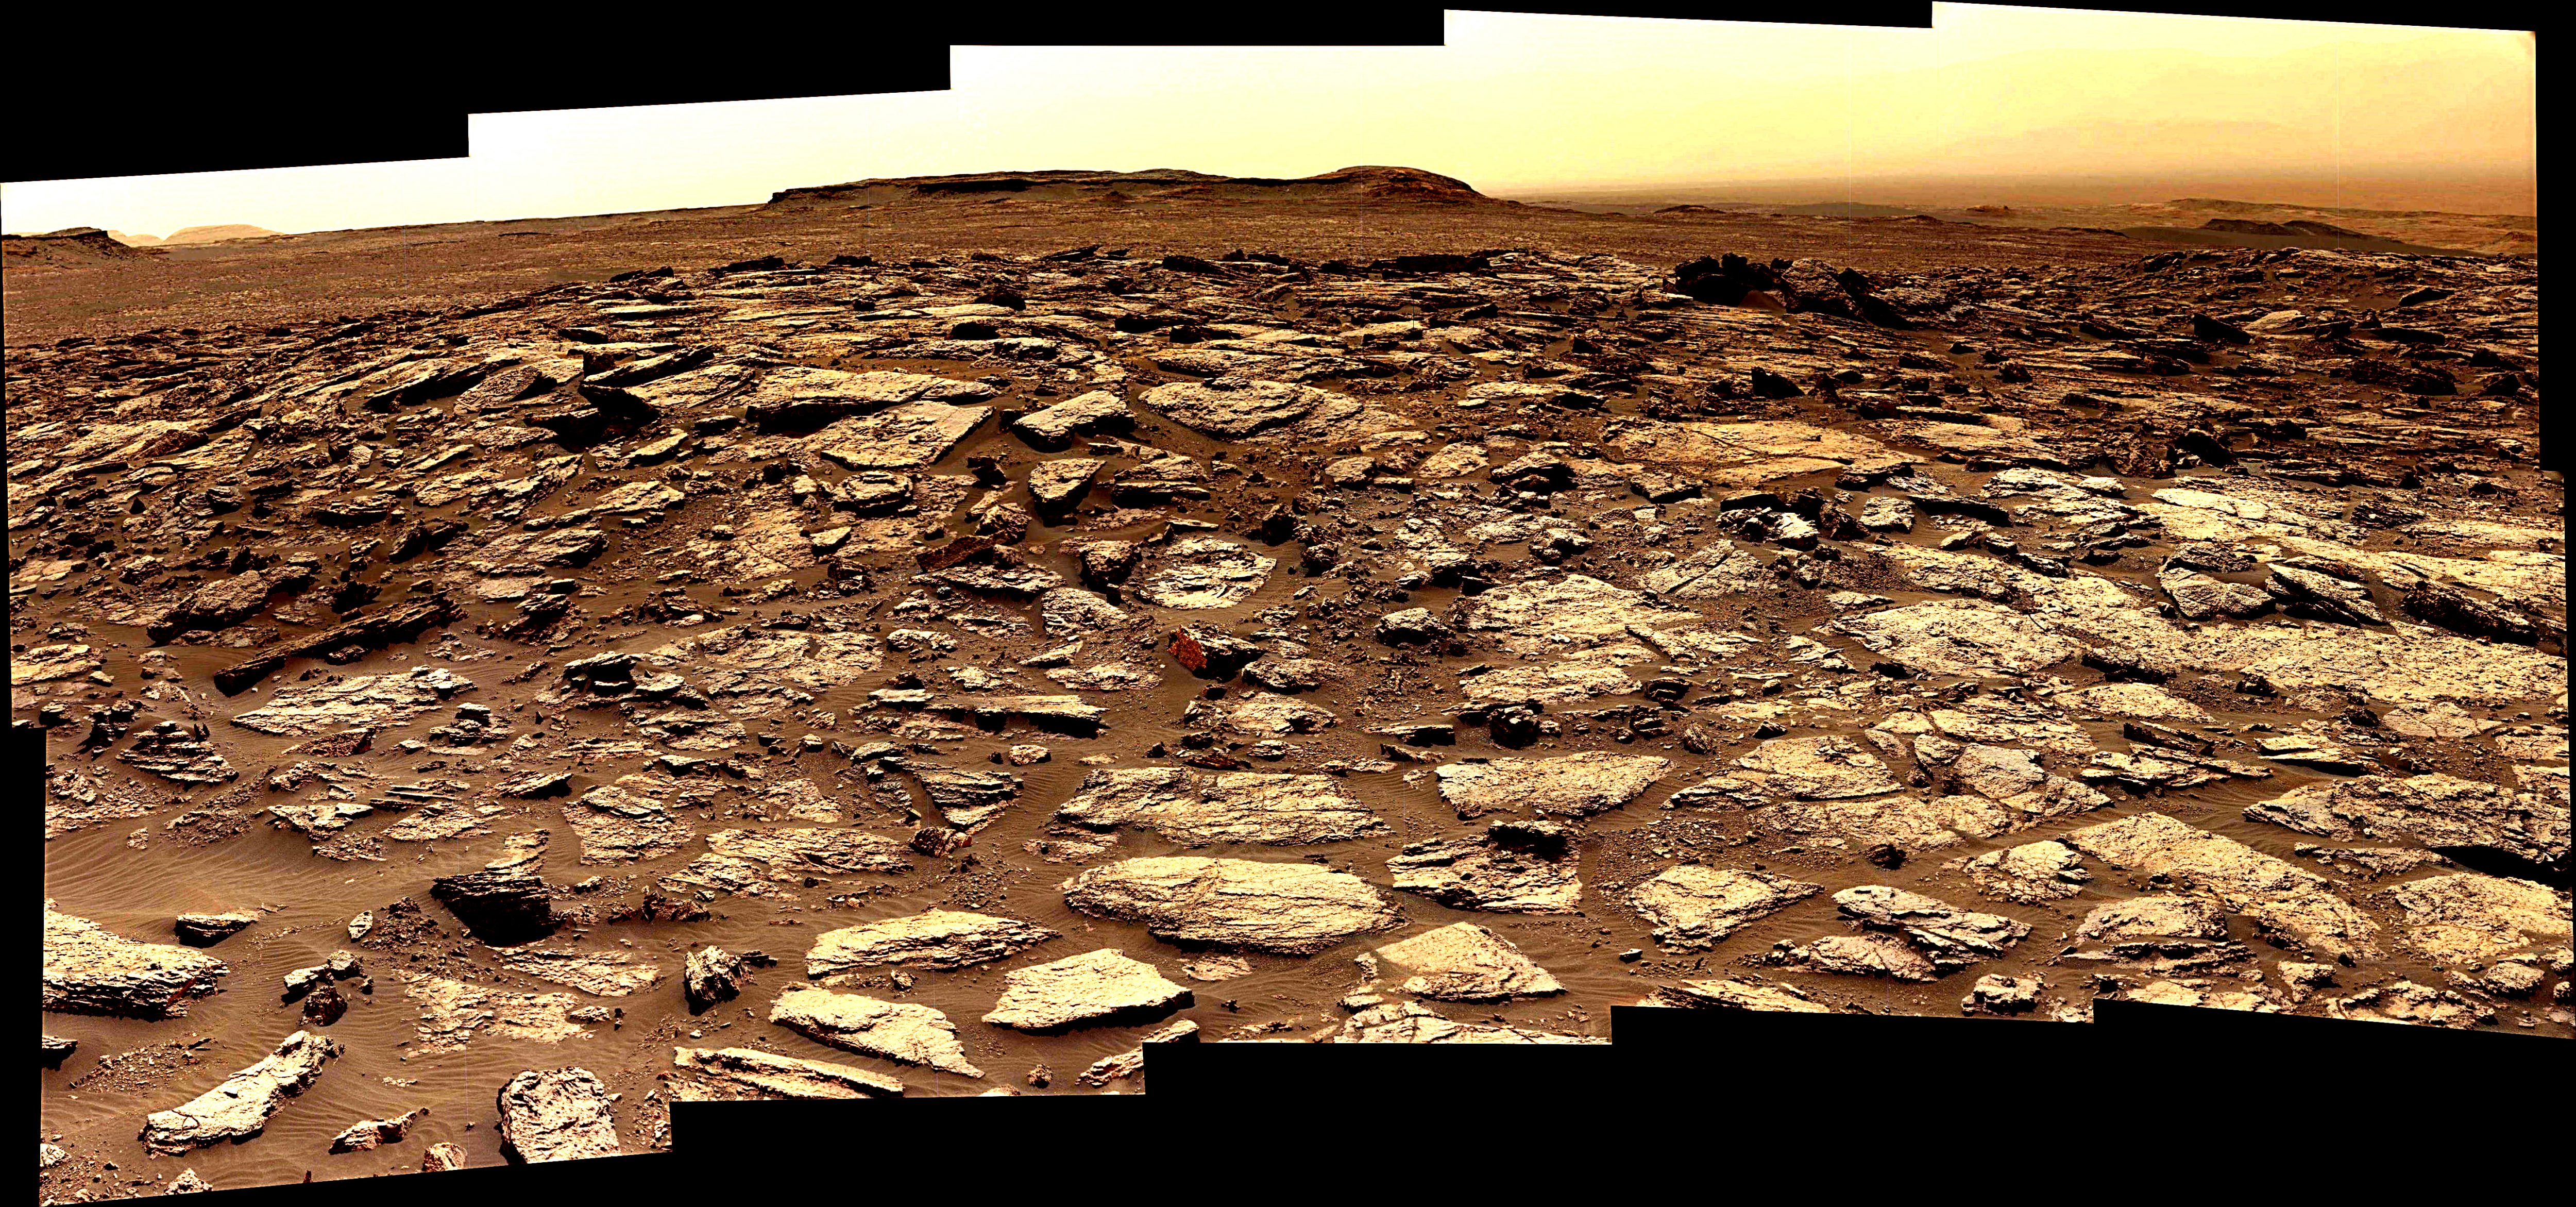 panoramic-curiosity-rover-view-1ee-sol-1485-was-life-on-mars